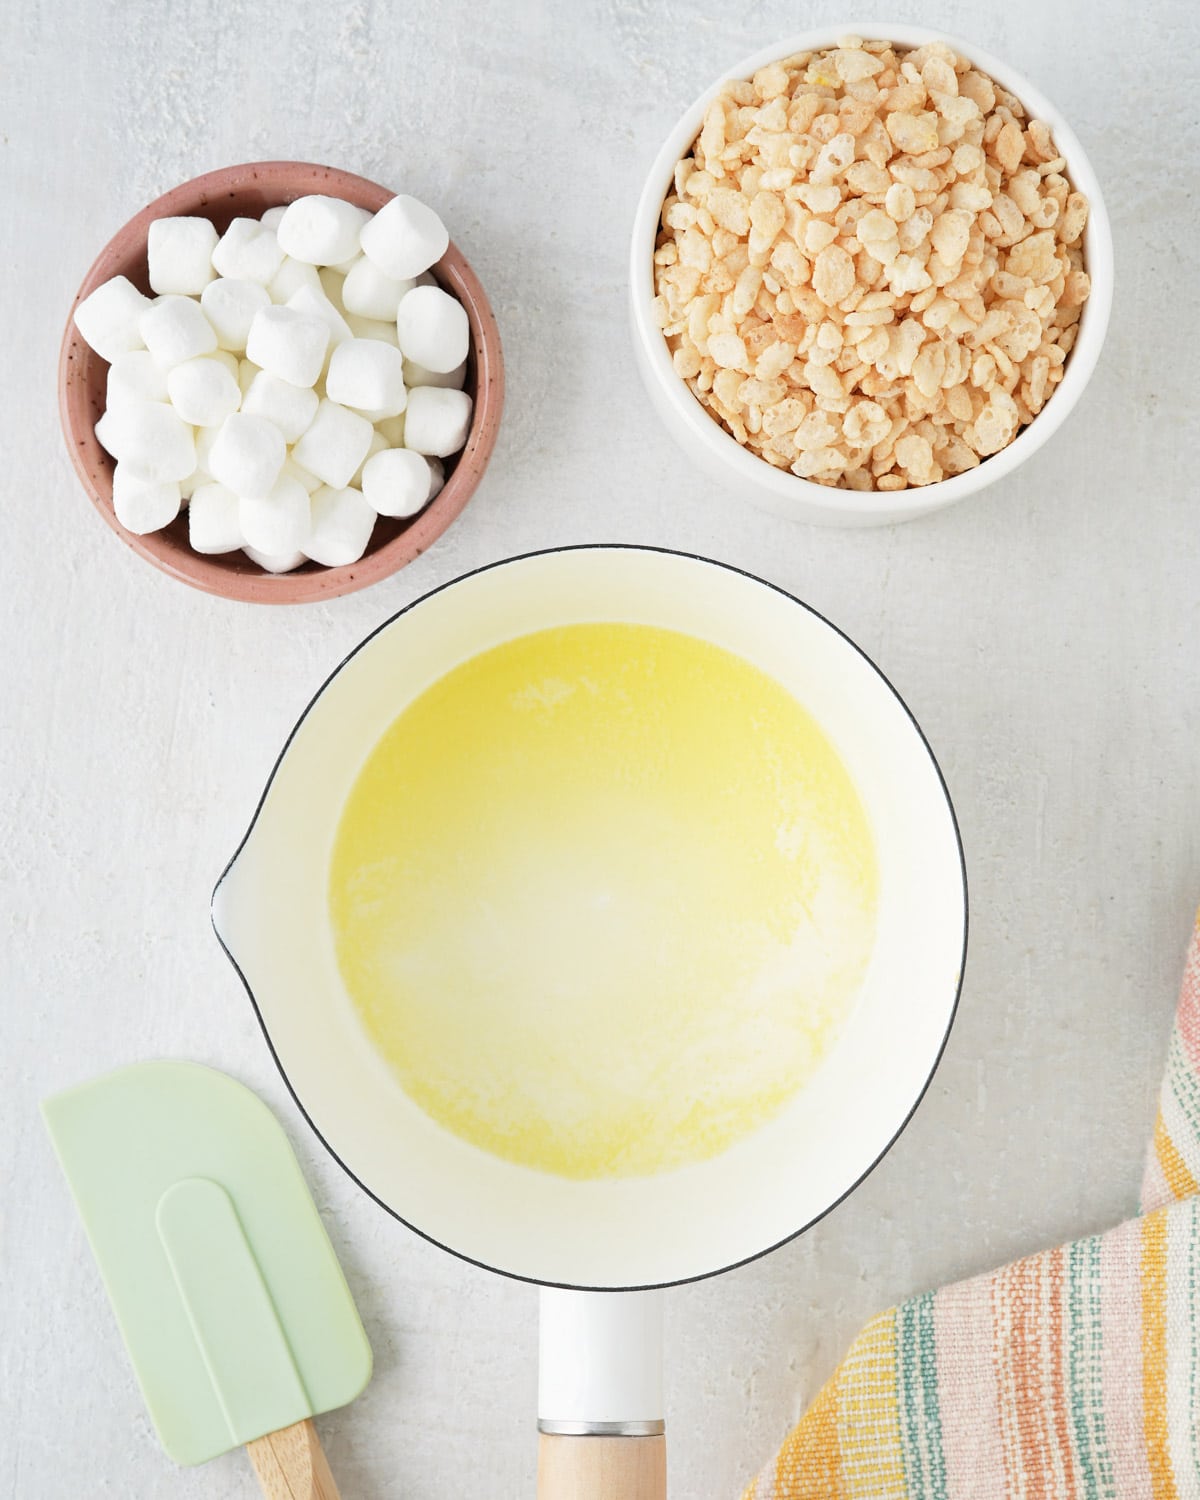 Melted butter, Rice Krispies and marshmallows